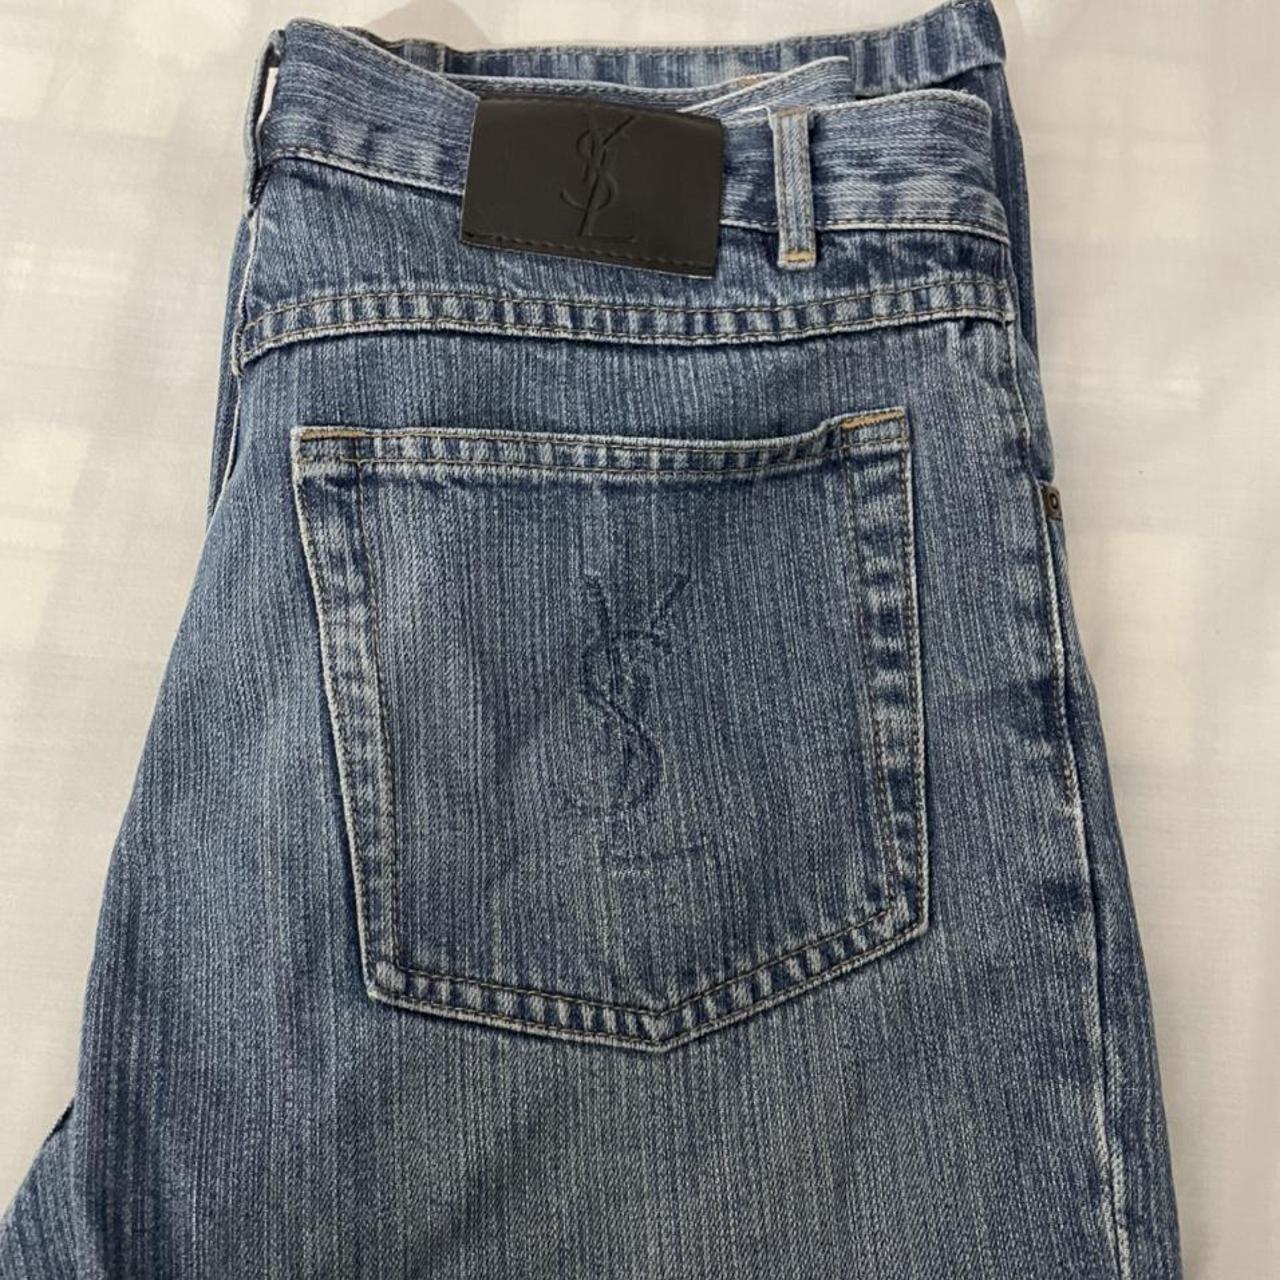 SOLD DO NOT BUY YSL Baggy jeans, great condition... - Depop